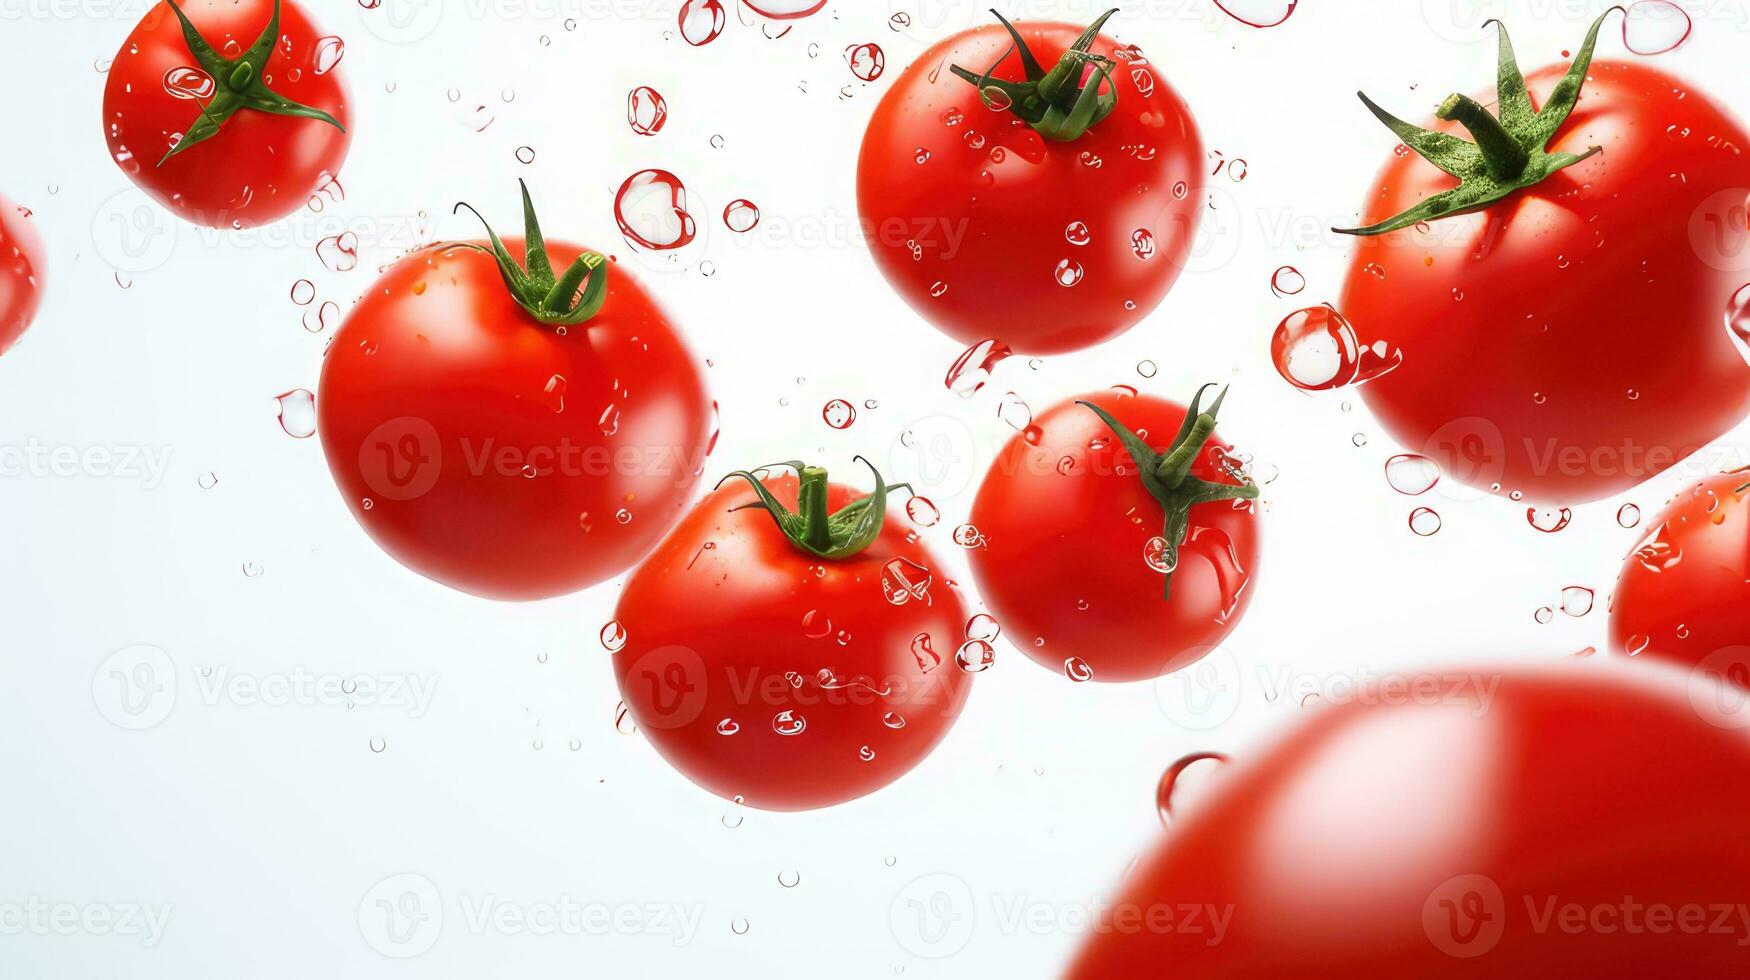 Fresh orange and red tomatoes on a white background photo